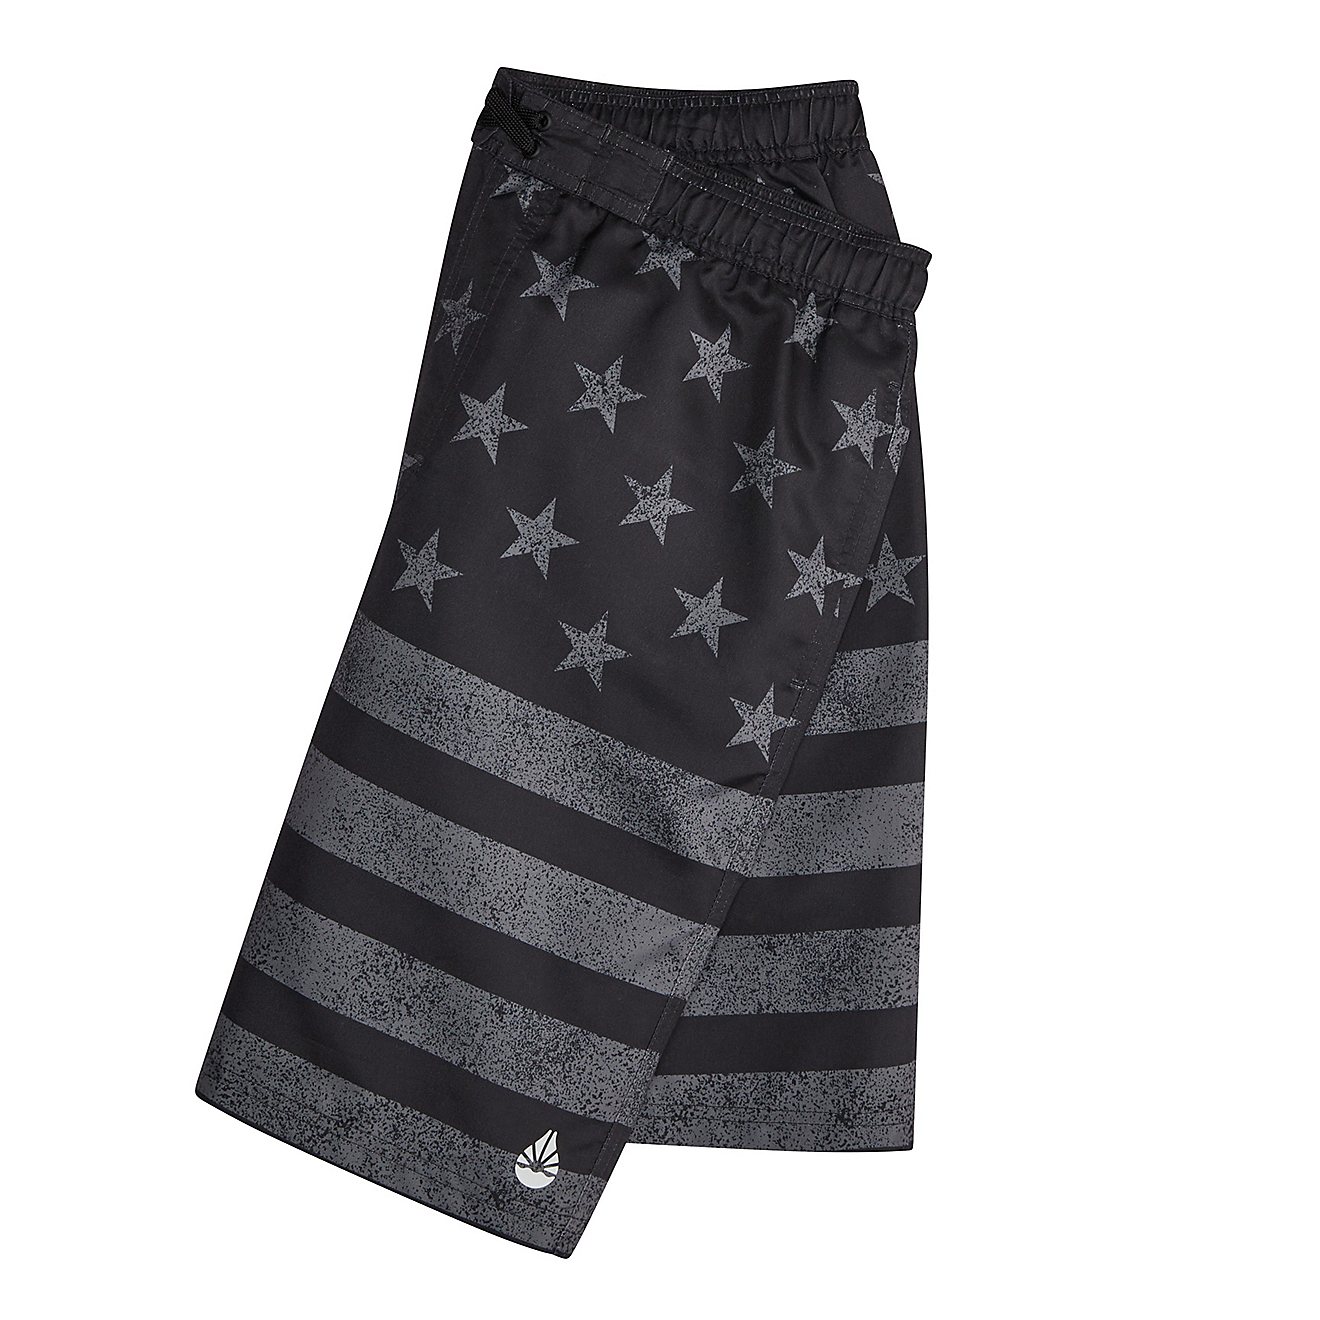 O'Rageous Men's Flag Print True Boardshorts                                                                                      - view number 2